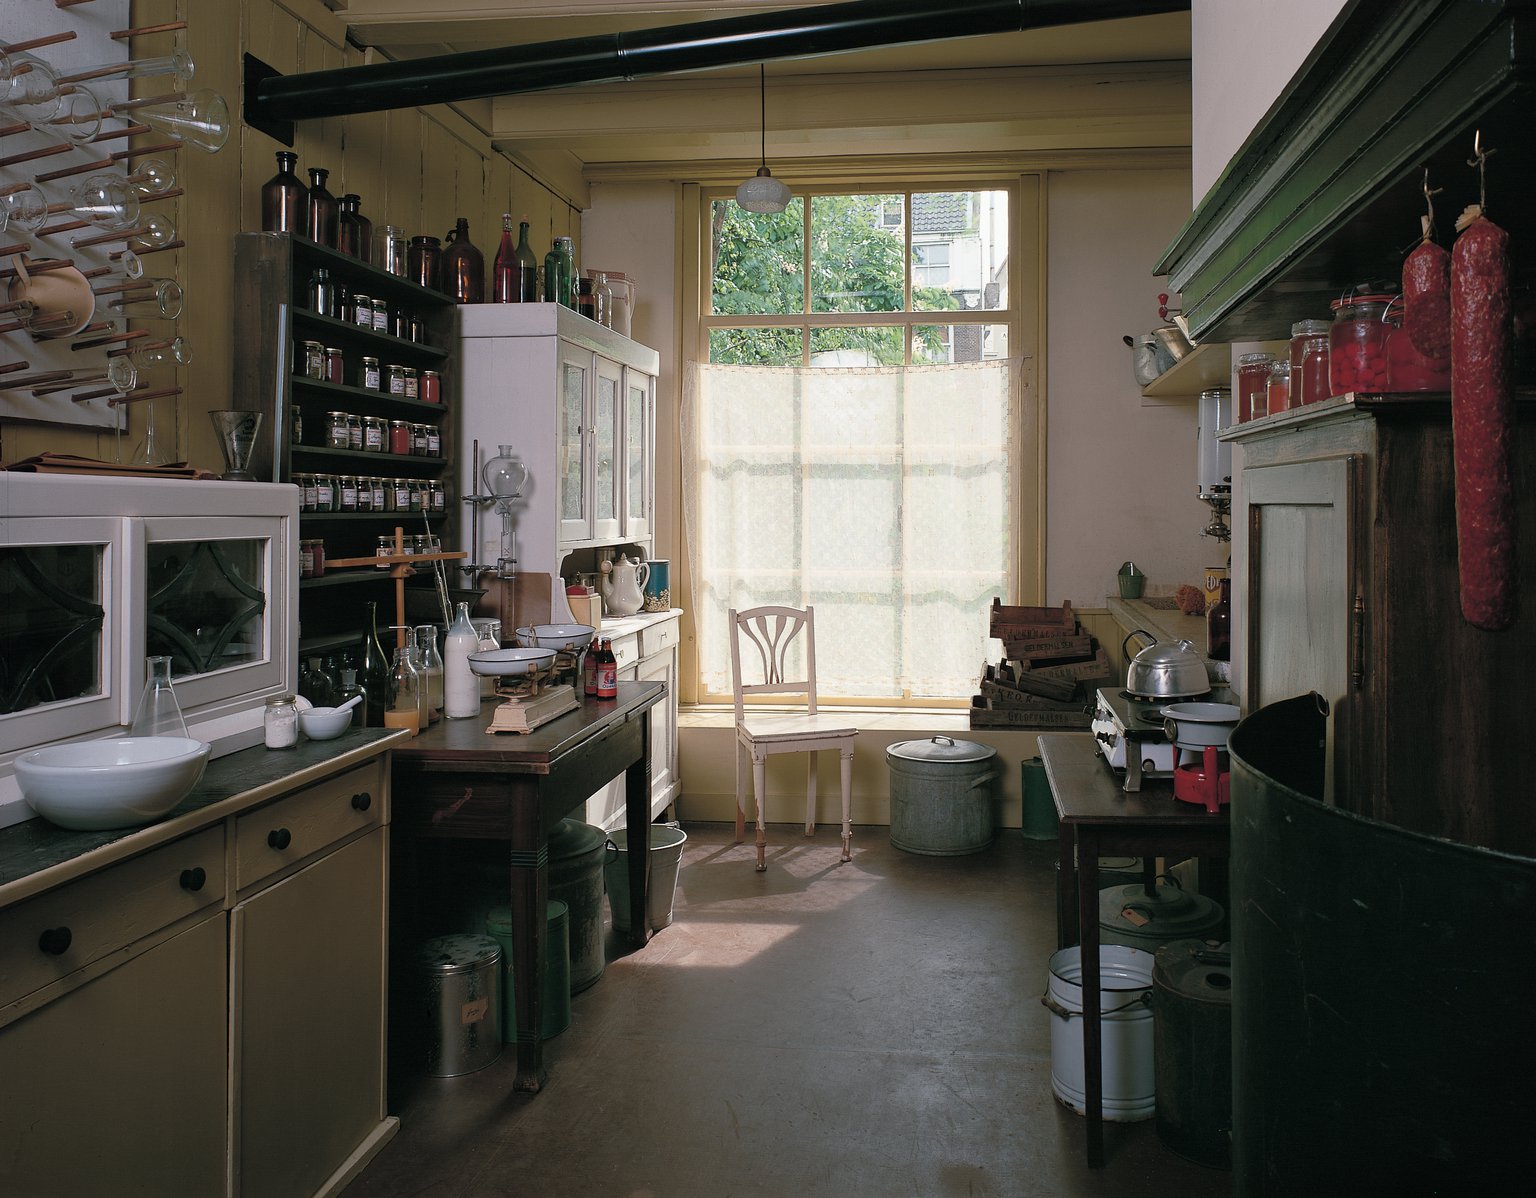 The office kitchen, reconstruction (1999).